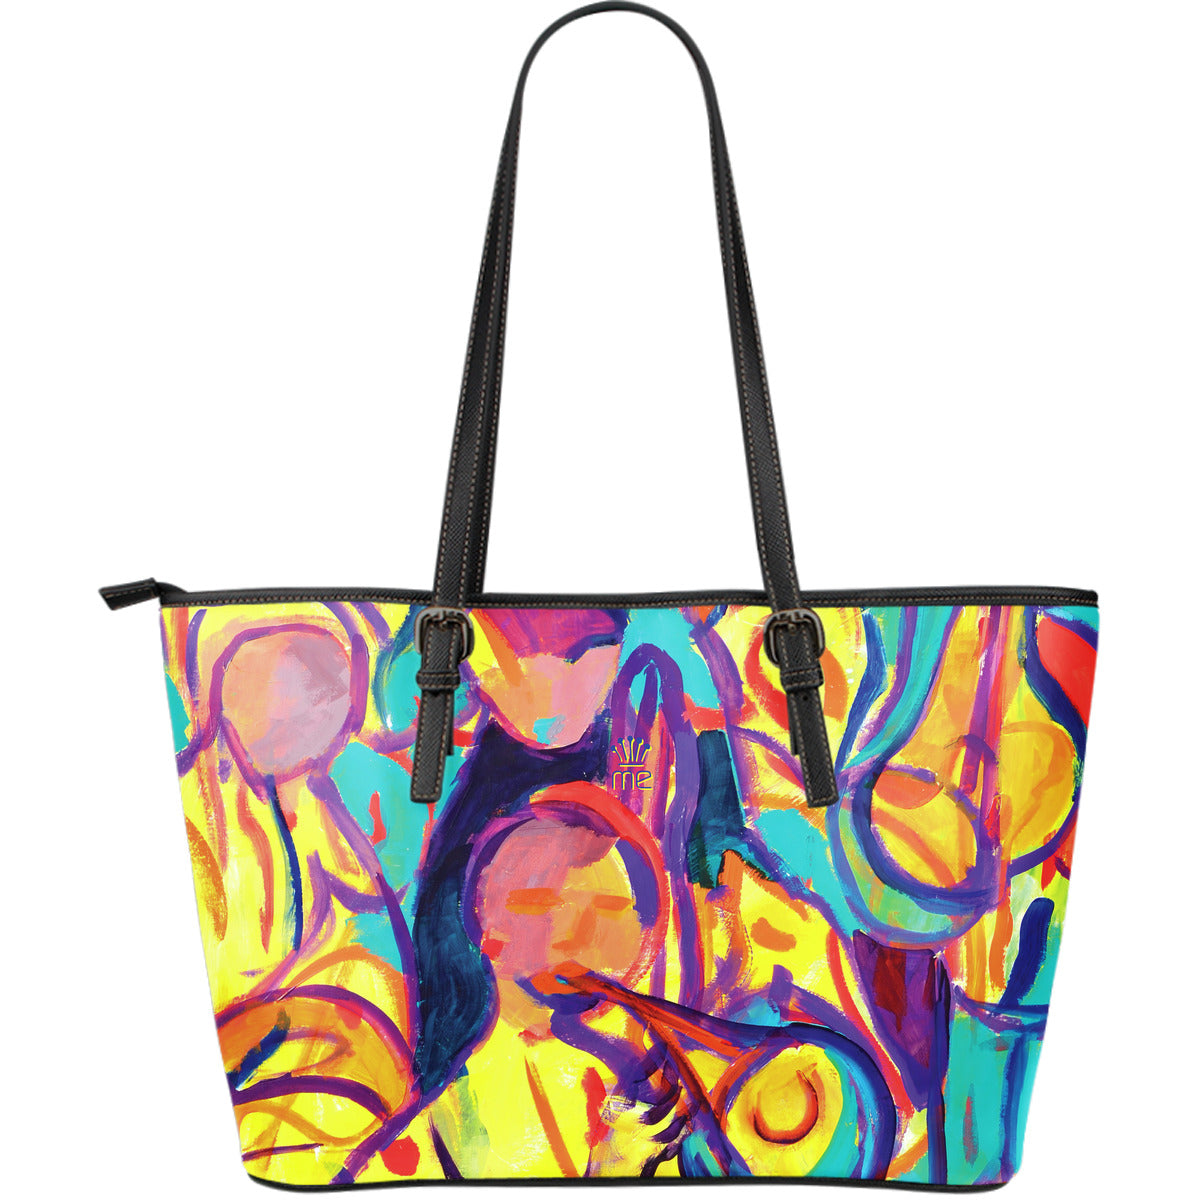 Colorful Tote Bag - JaZazzy 